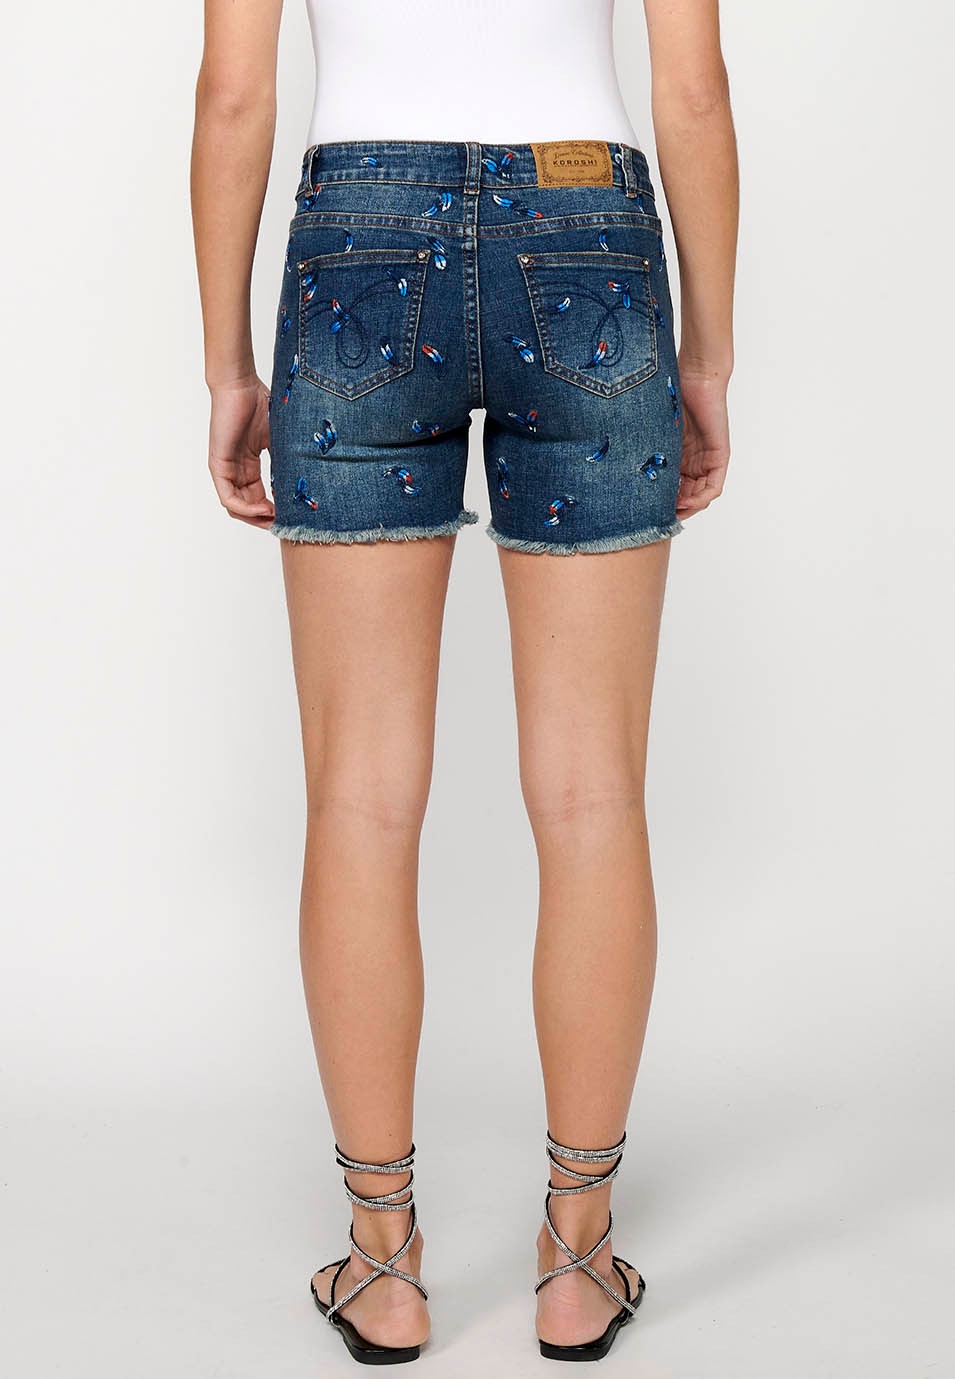 Denim shorts with front zipper and button closure and embroidered fabric with five pockets, one blue pocket pocket for women 3